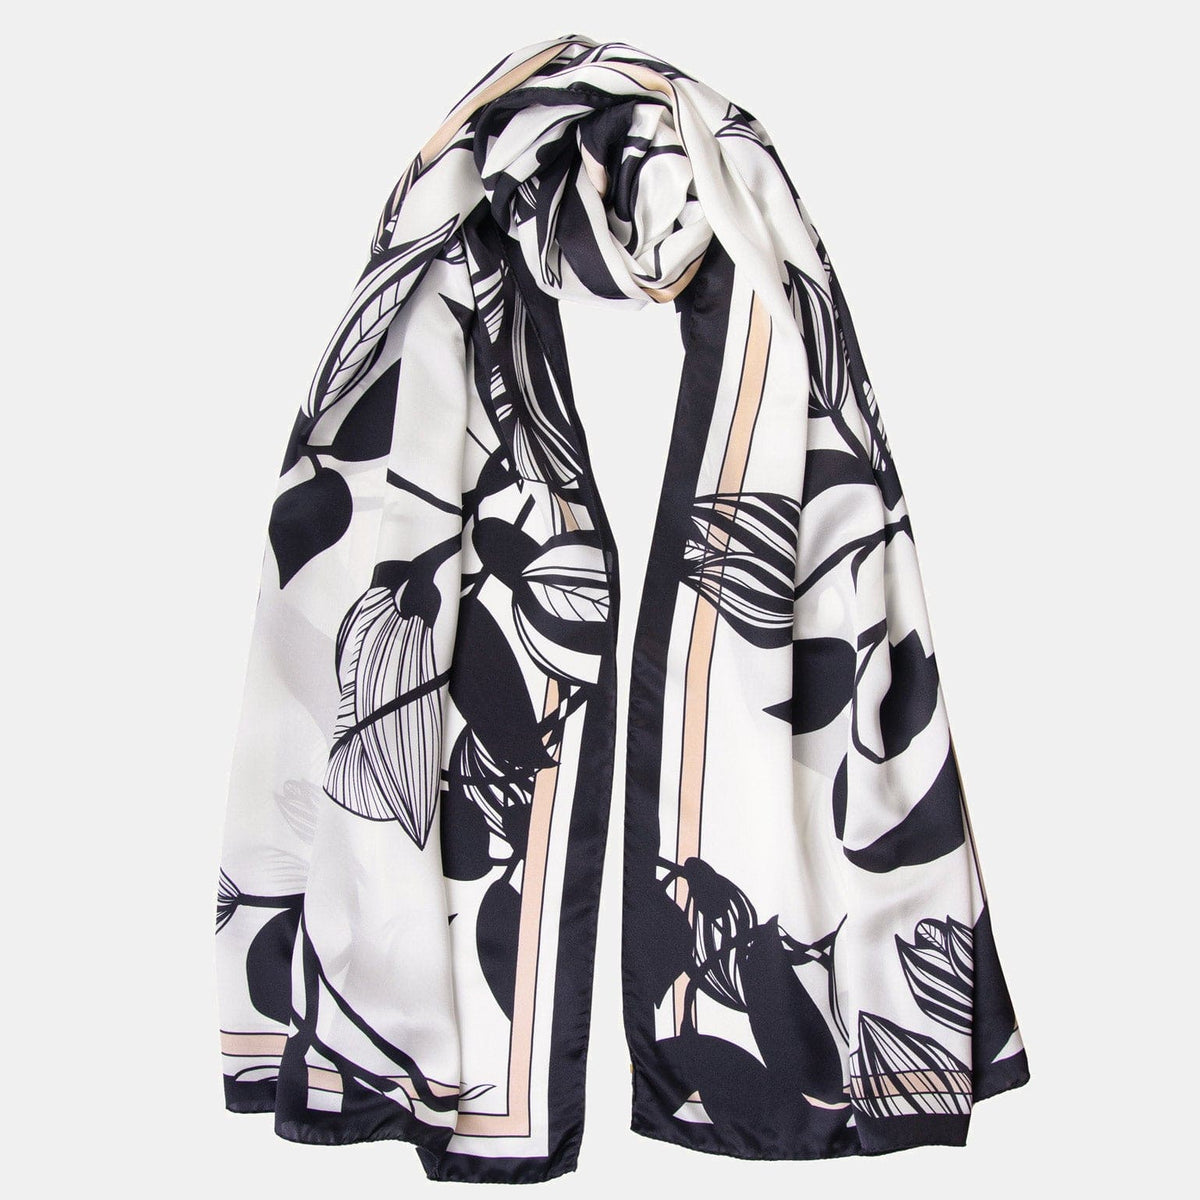 Luxury silk satin shawl in black and sofft white